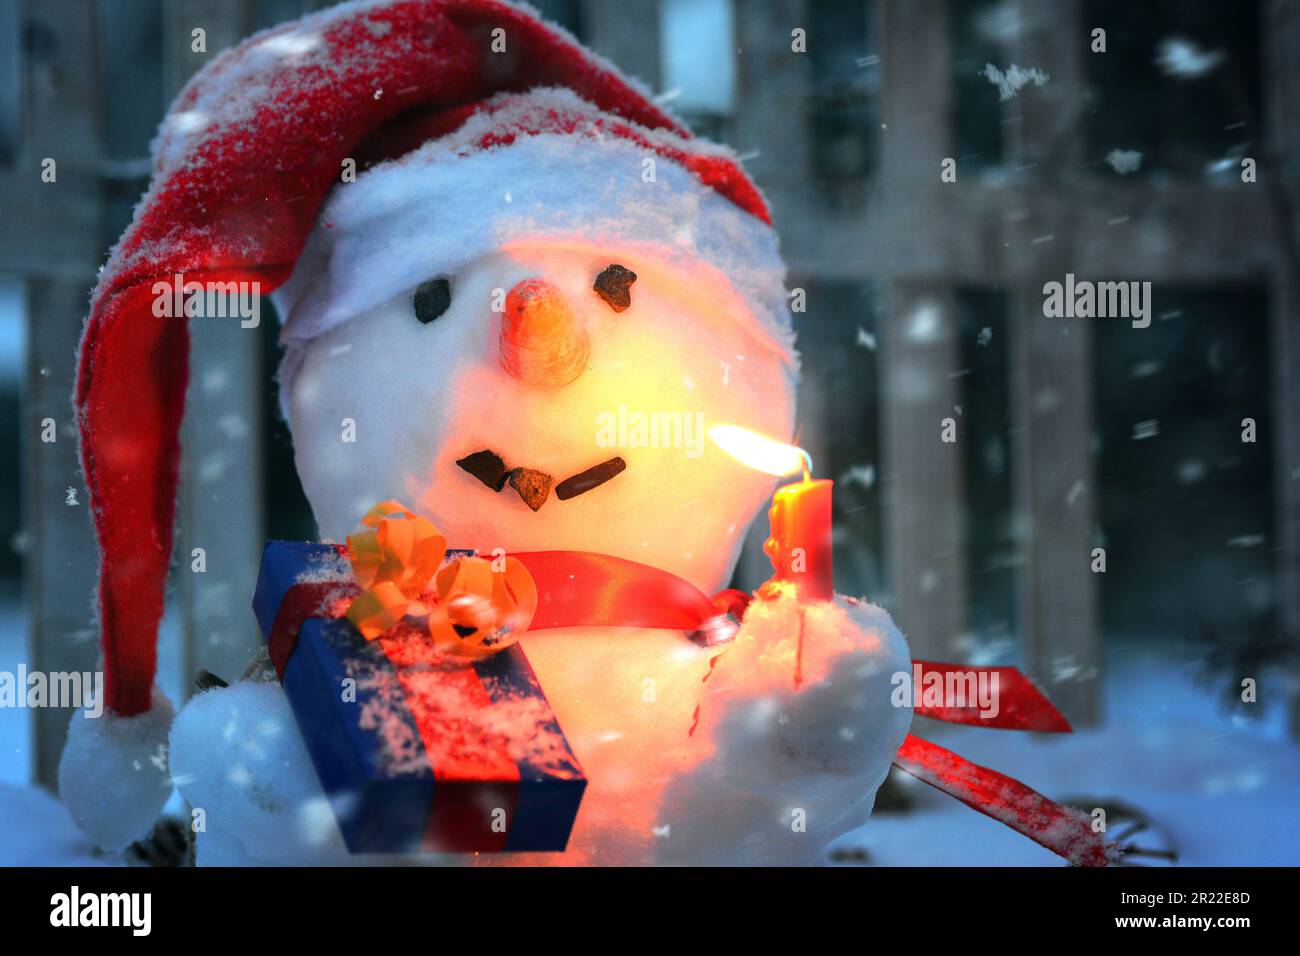 snow man with Santa Claus cap, burning candle in its hand and Christmas gift Stock Photo